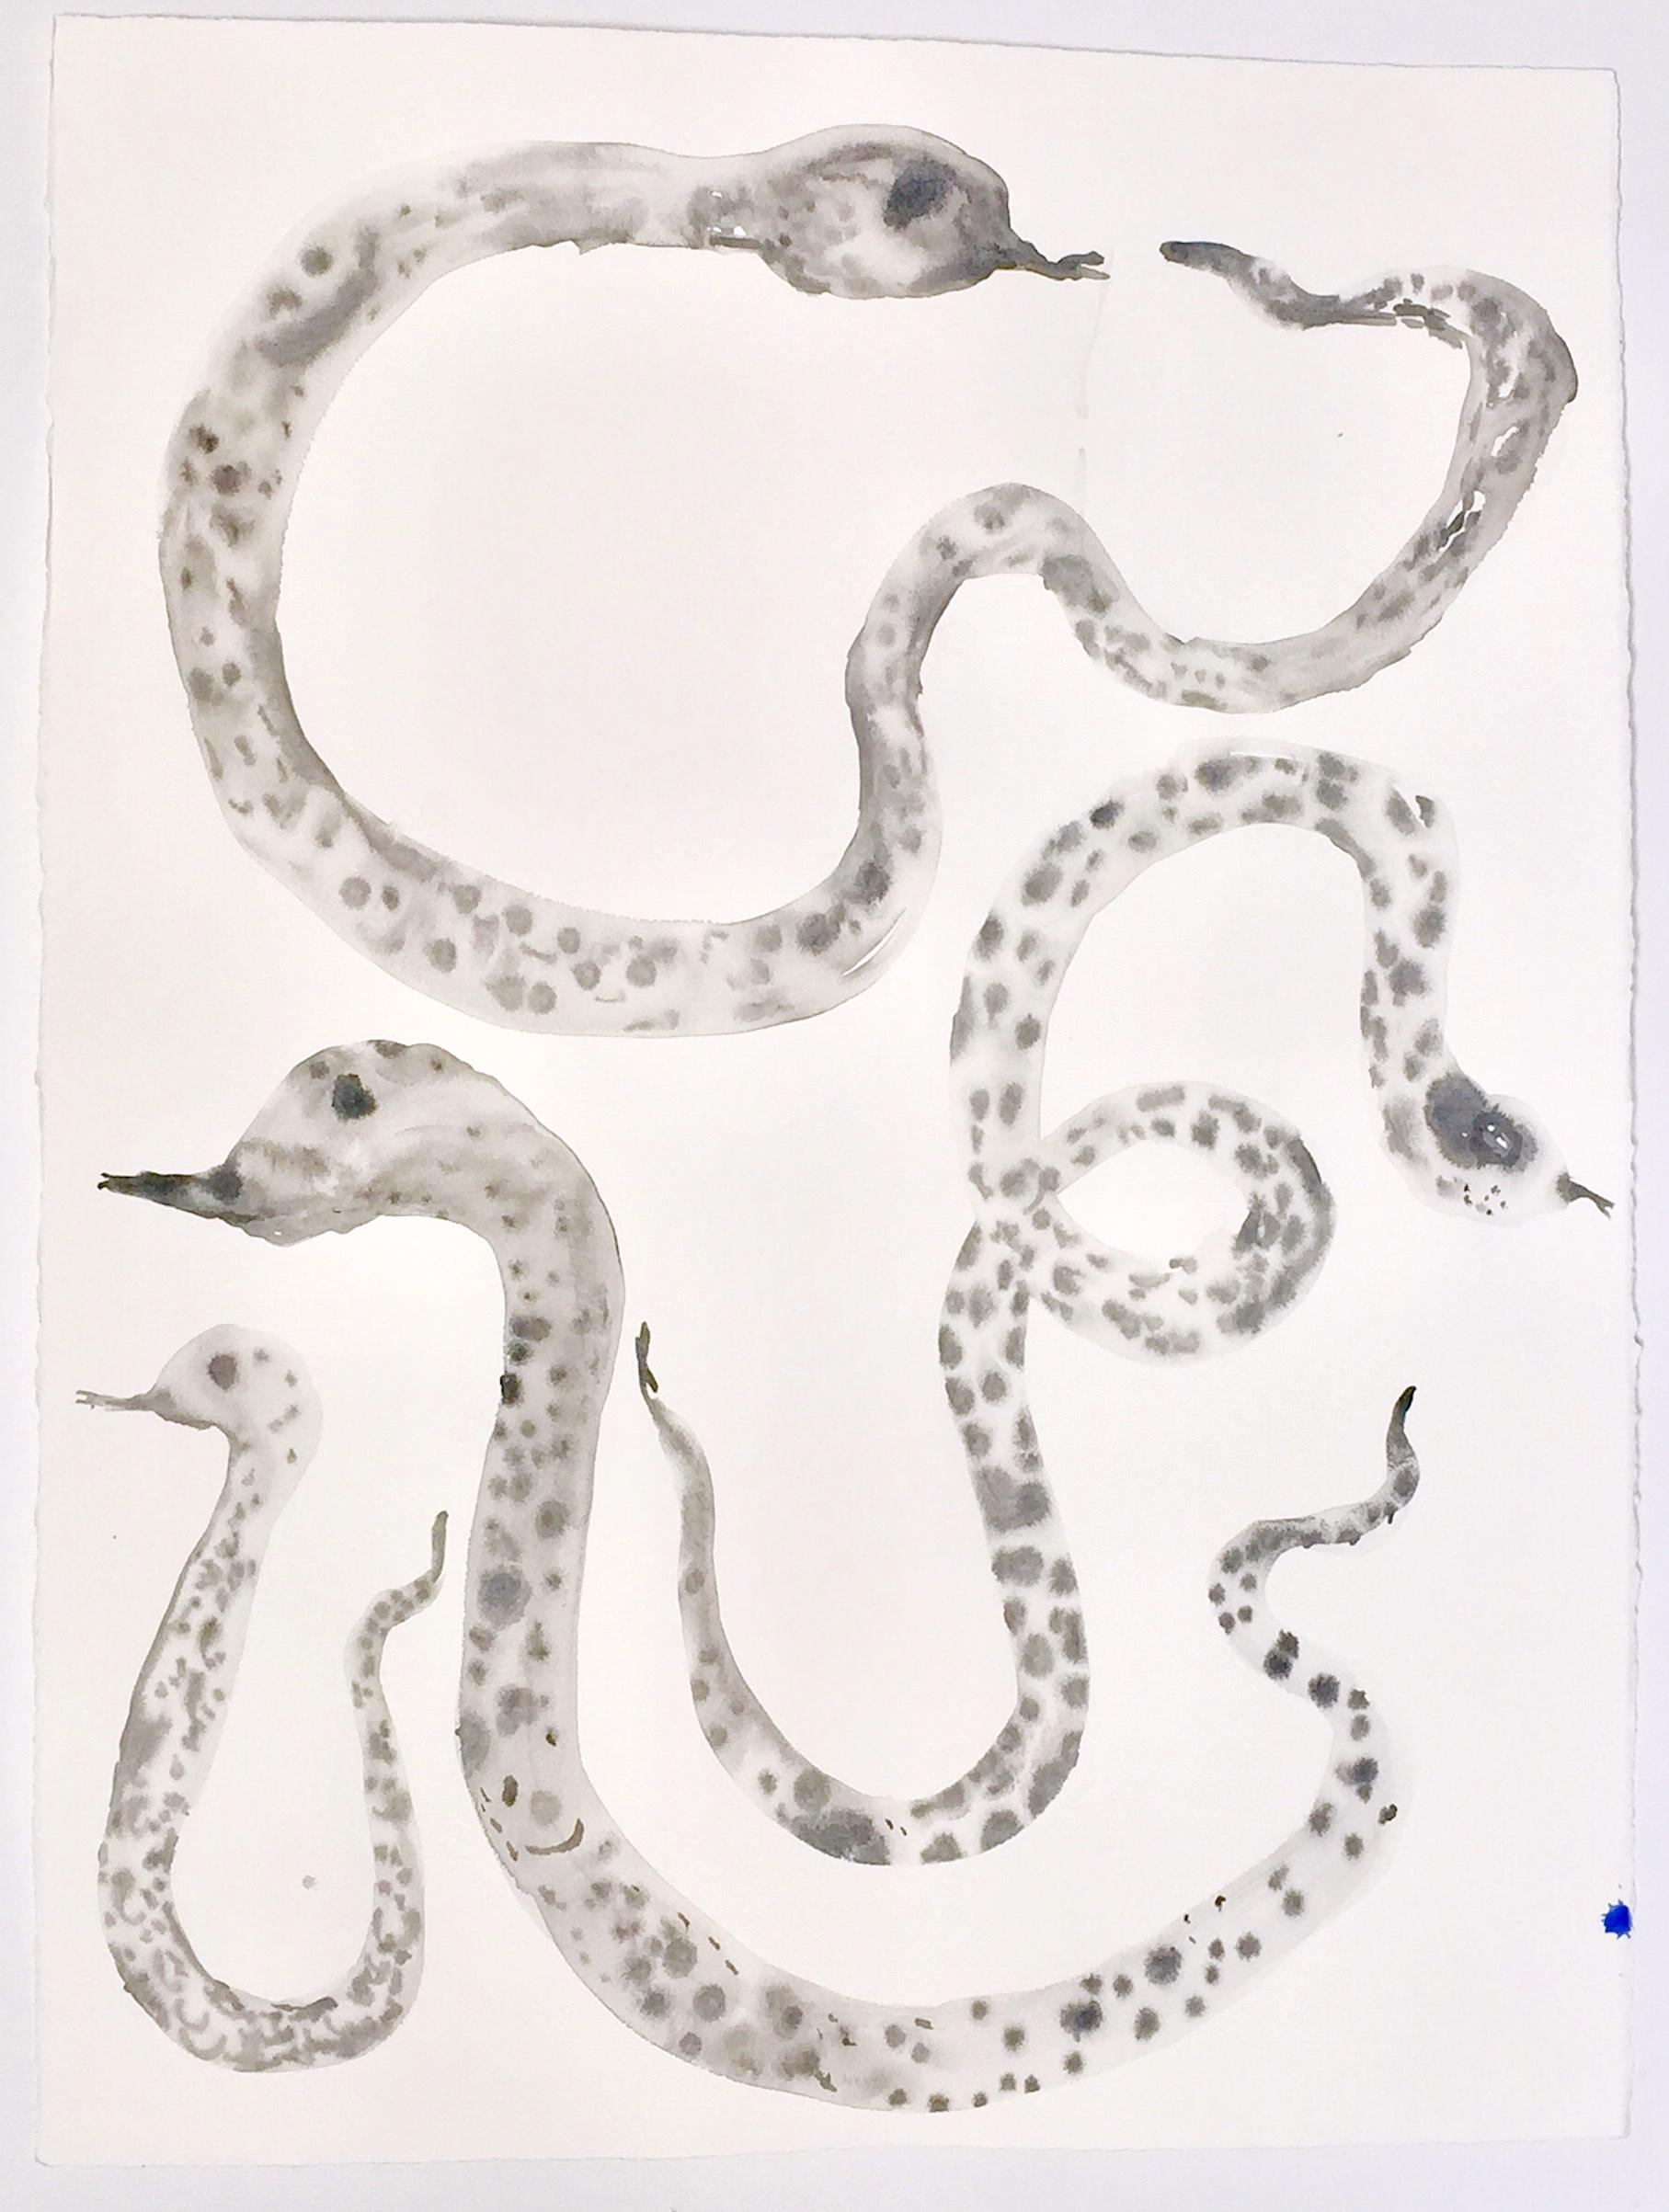 Black and White Snakes ink on Watercolor Paper - Beige Figurative Painting by Nina Bovasso